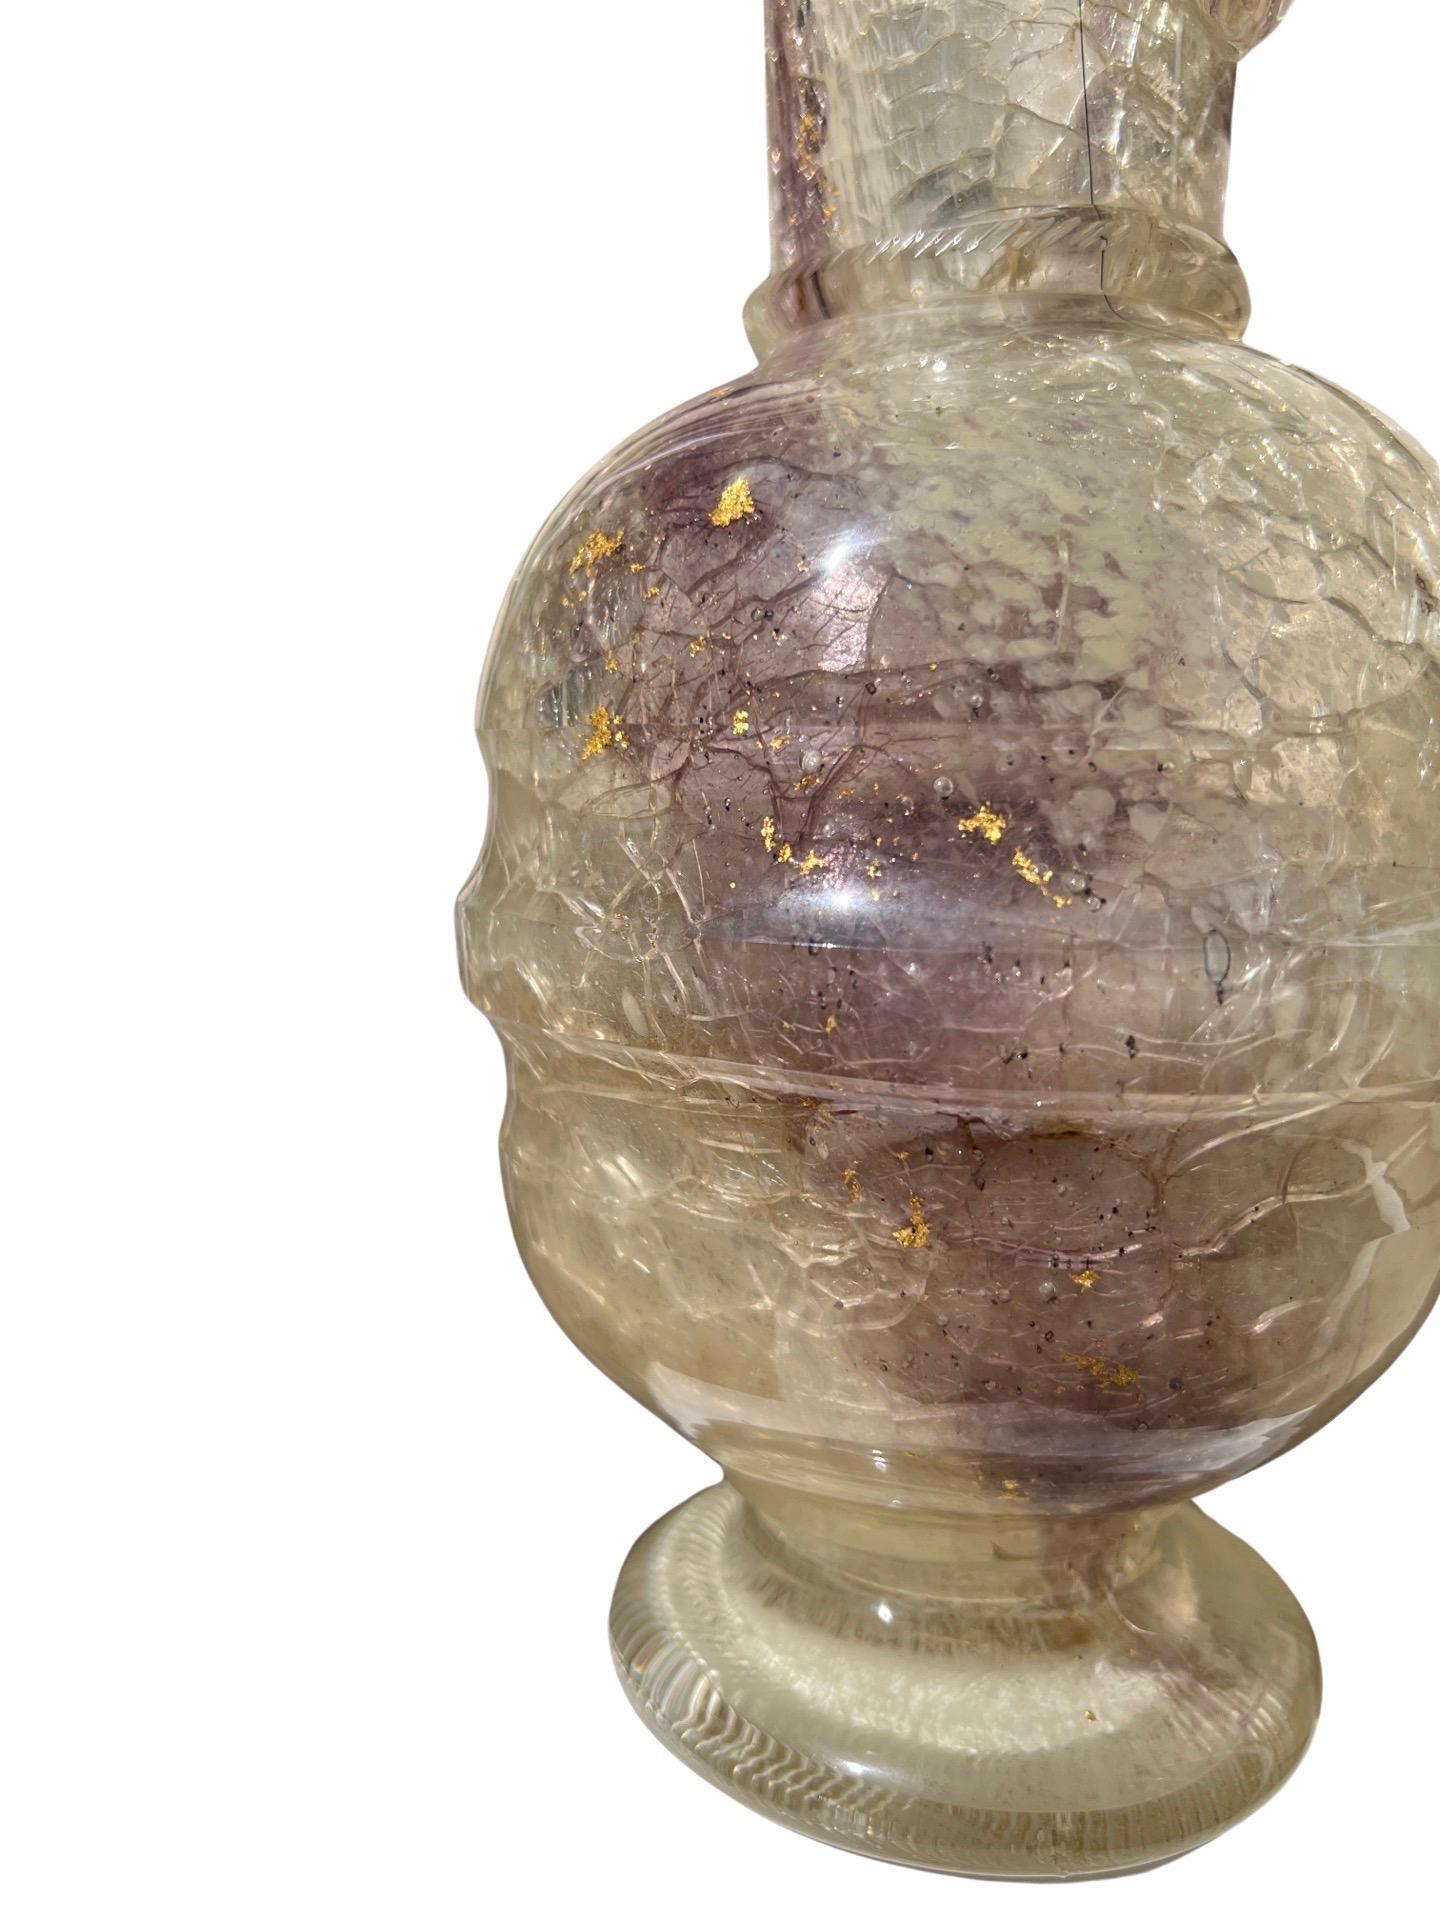 After The Roman Antique - Rock Crystal, Glass & Gold Flecking Grand Tour Pitcher For Sale 9